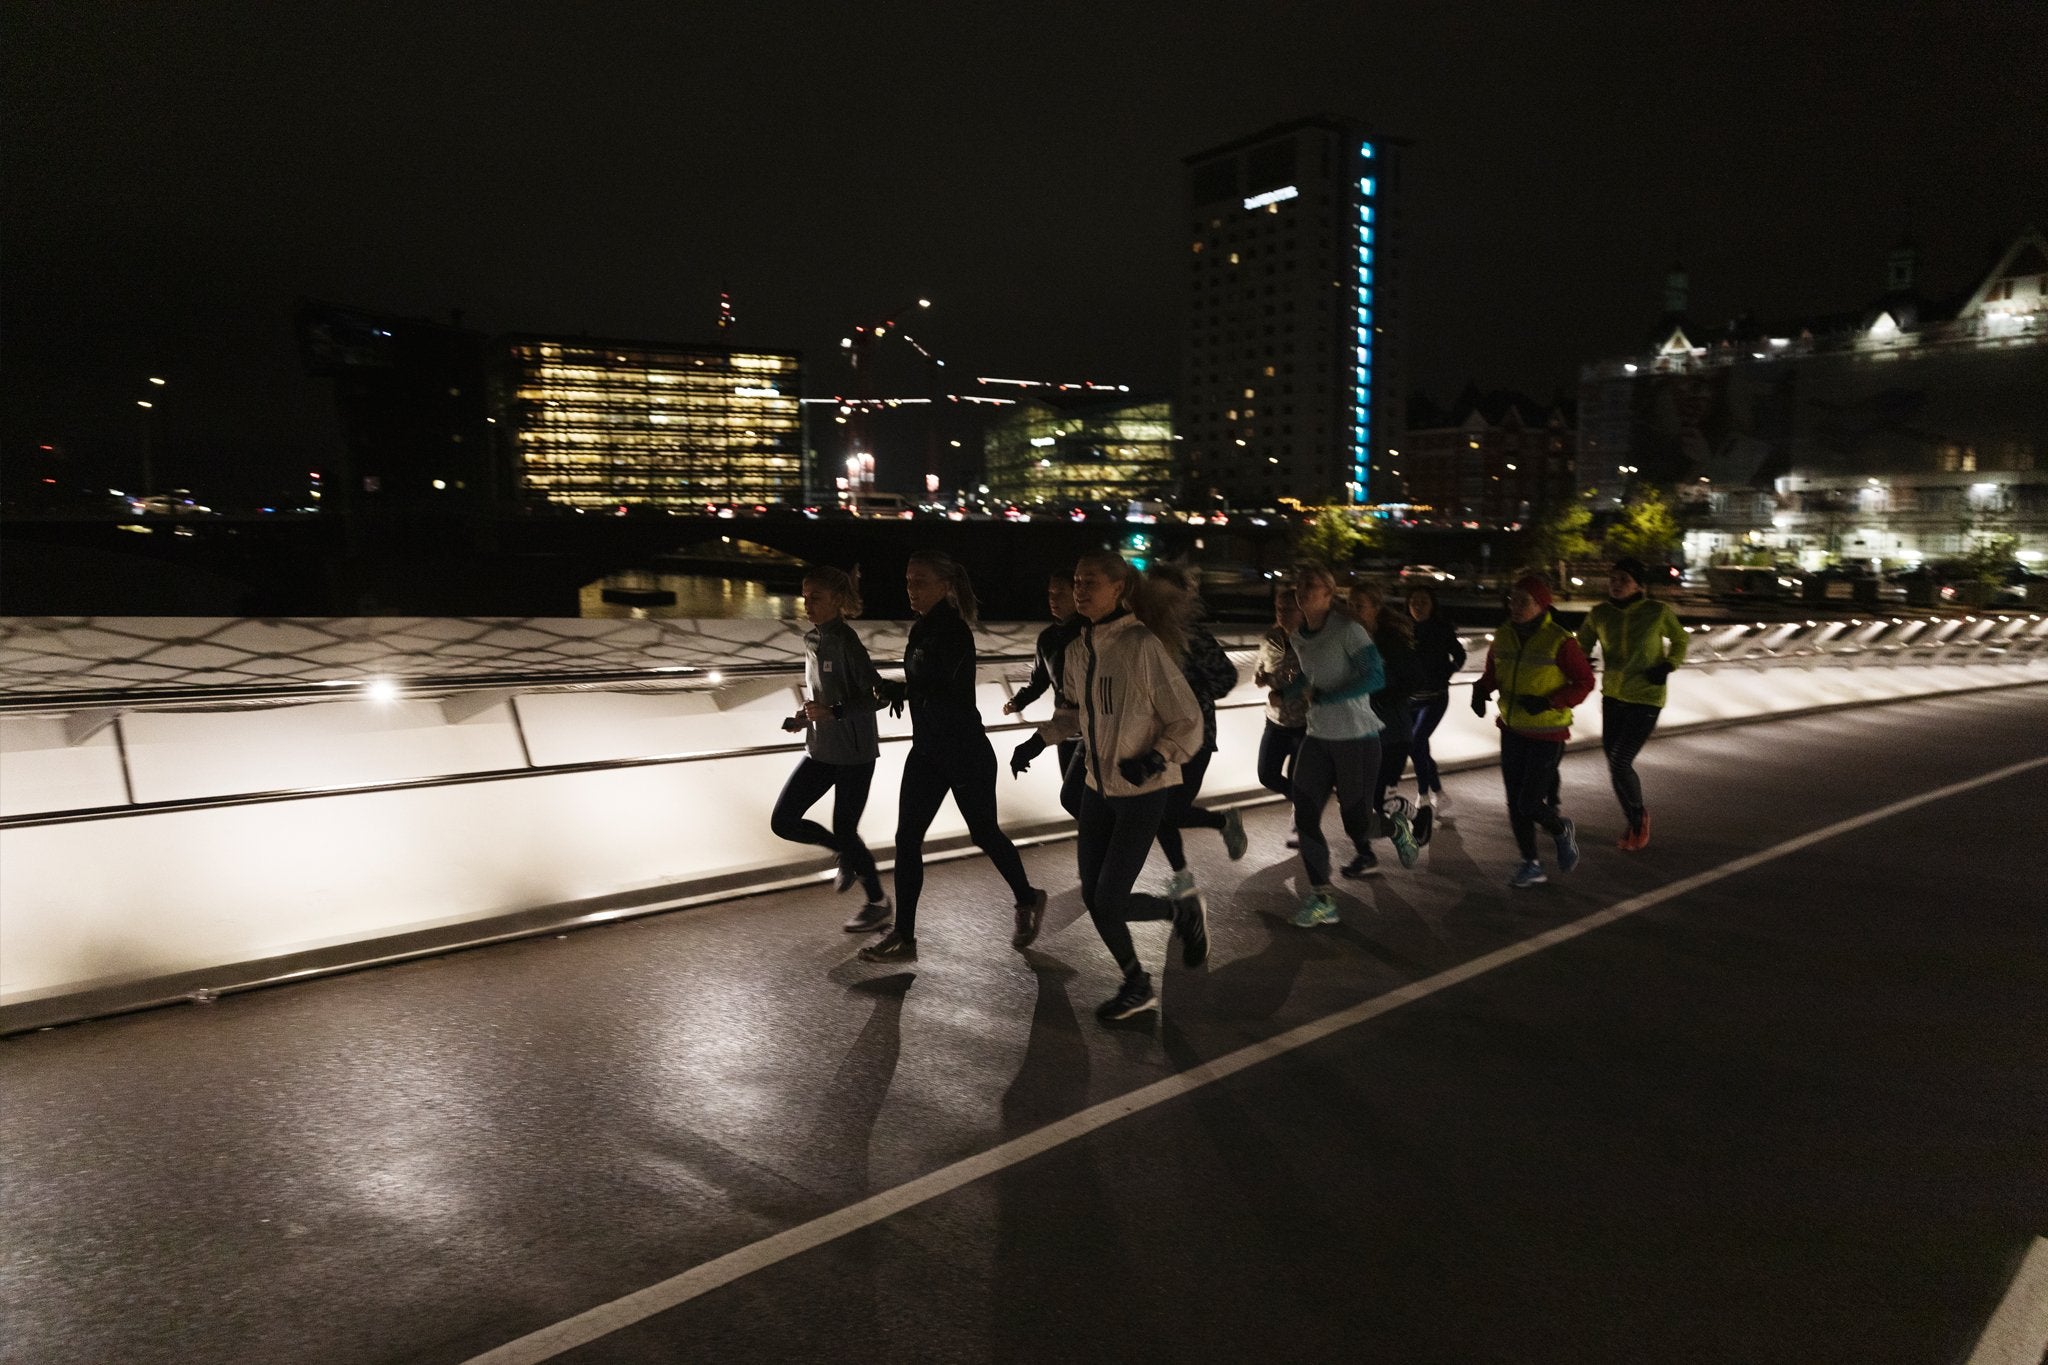 Lots of women feel unsafe running in the dark – so we give up